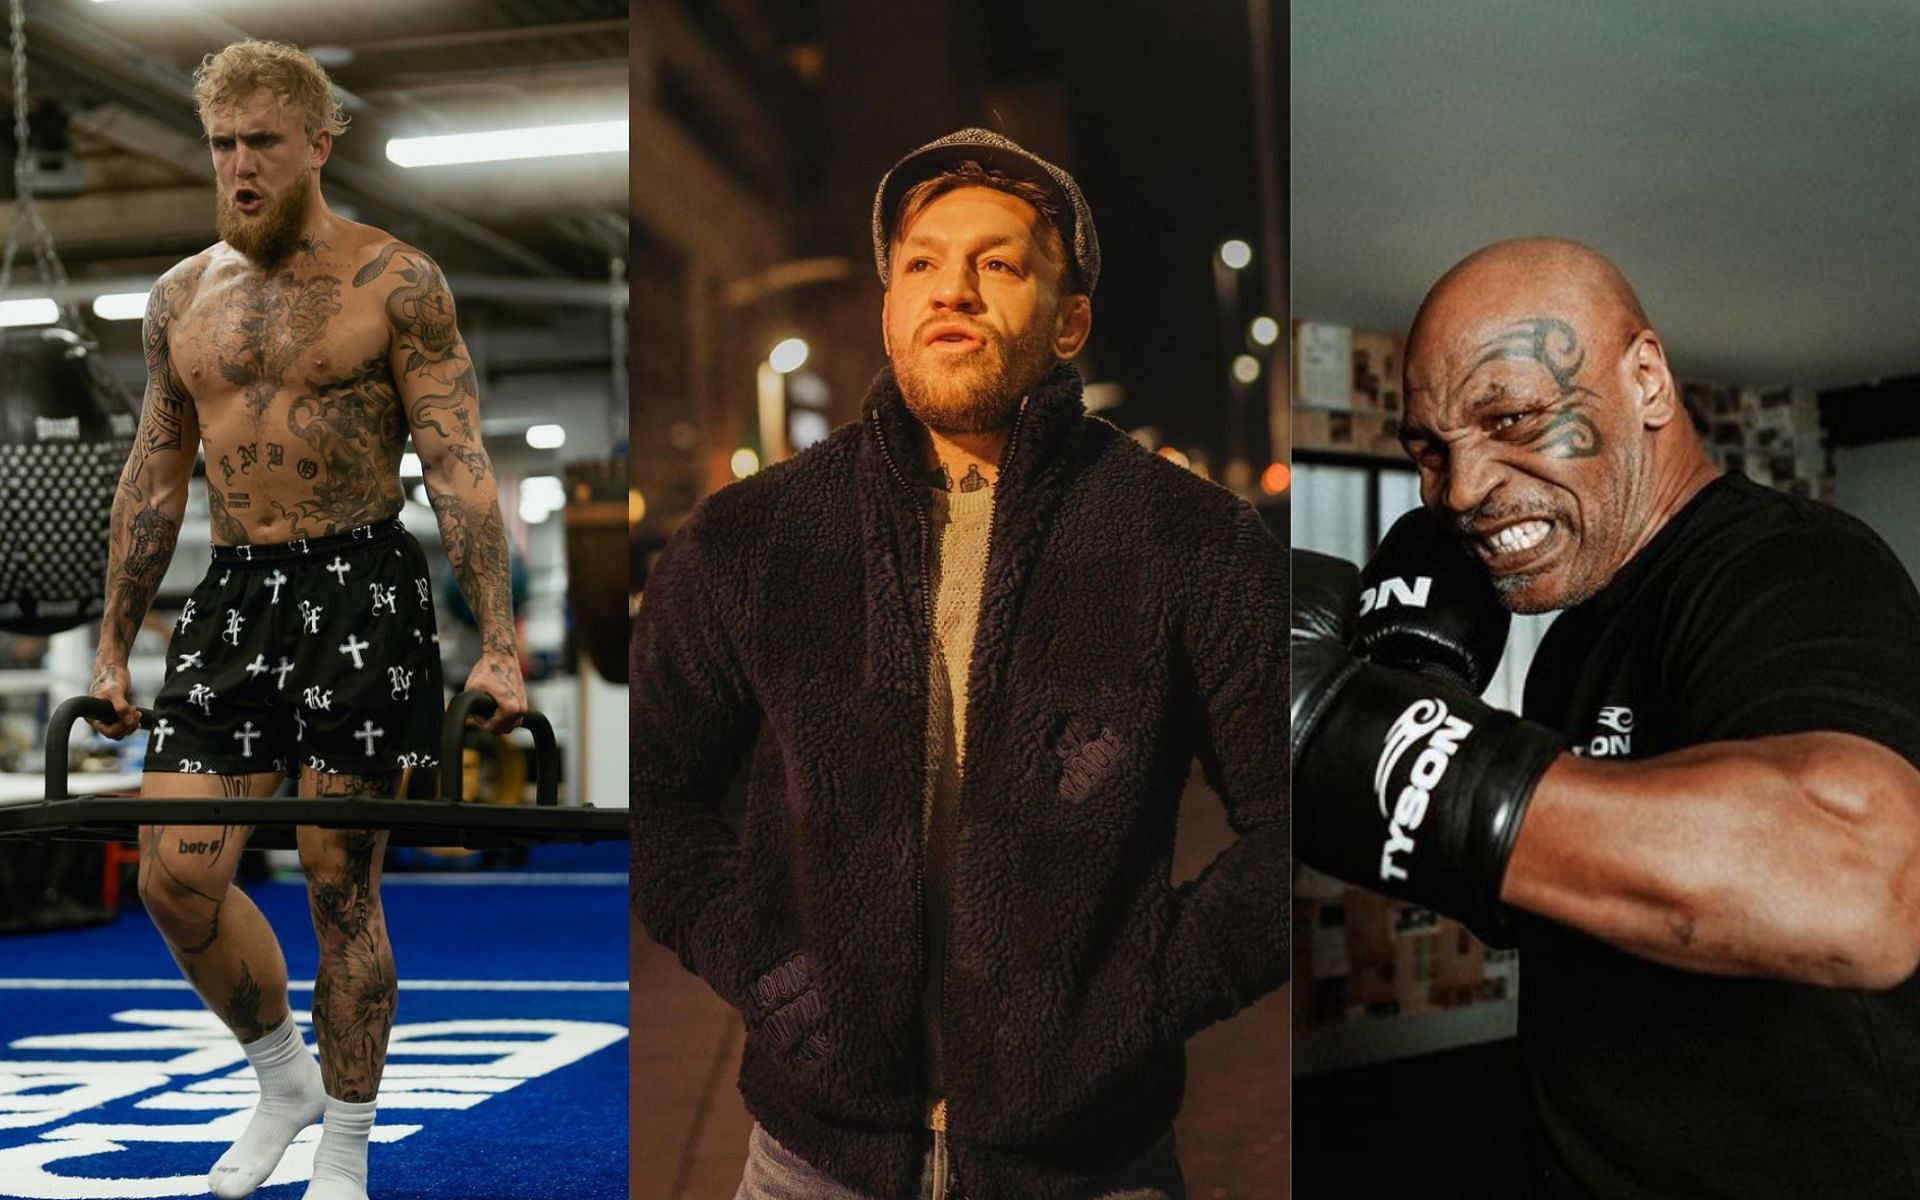 Conor McGregor (center) gives his thoughts on the upcoming Jake Paul (left) vs. Mike Tyson (right) fight [Photo Courtesy of @thenotoriousmma, @jakepaul and @miketyson on Instagram]